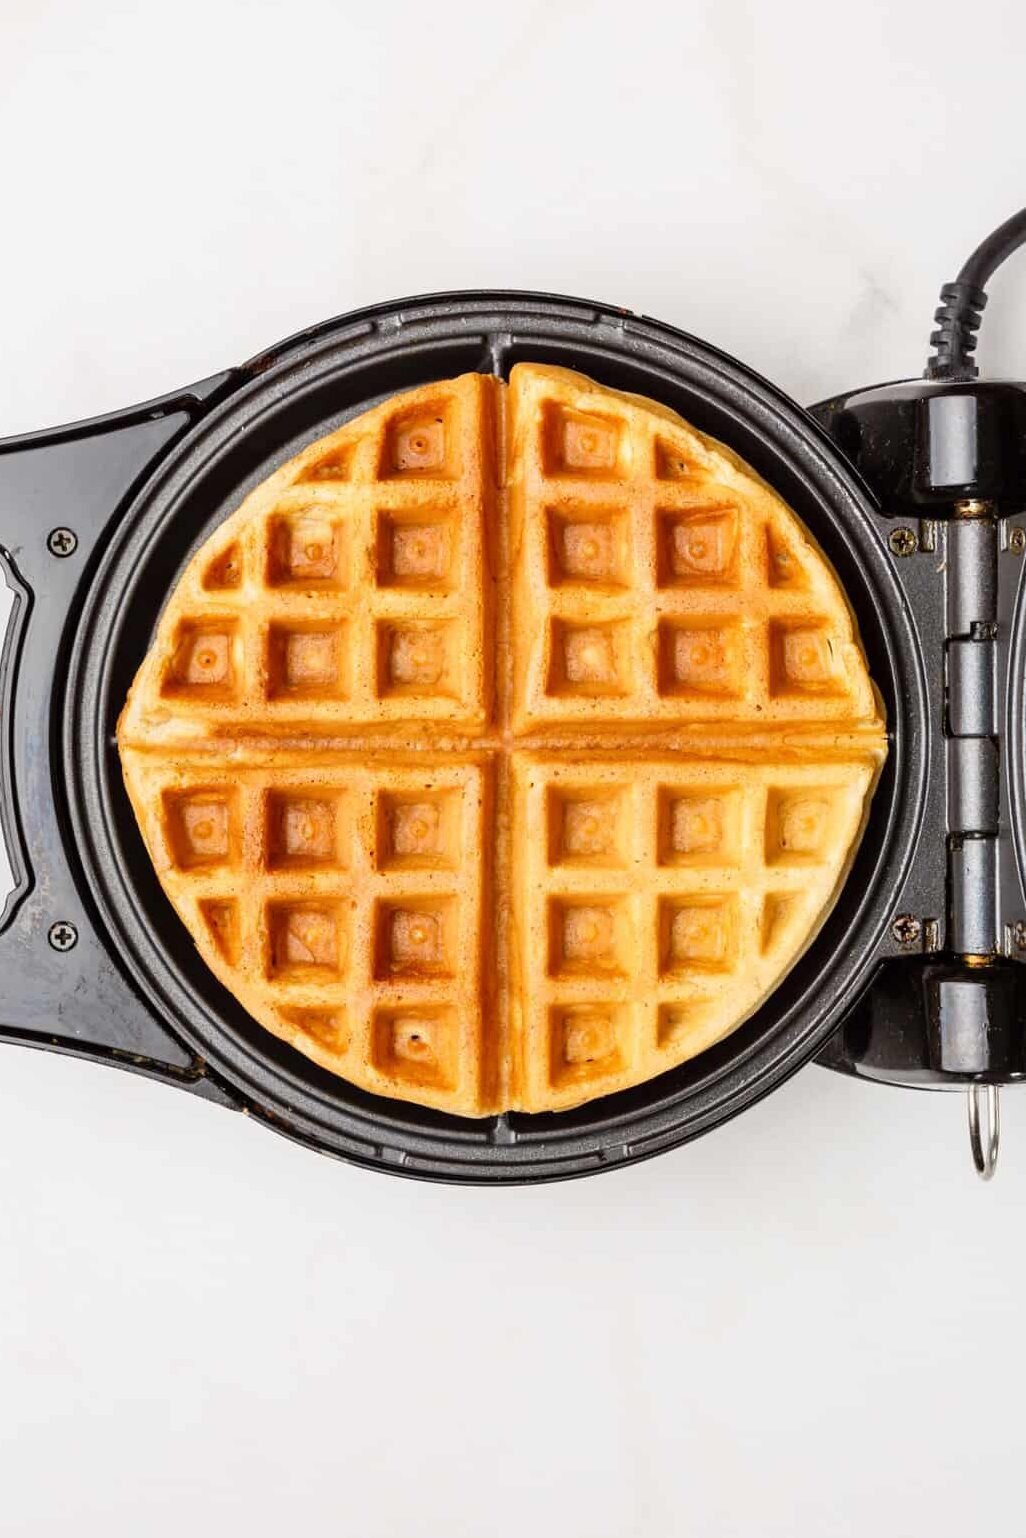 top down image of a cooked waffle in a waffle iron